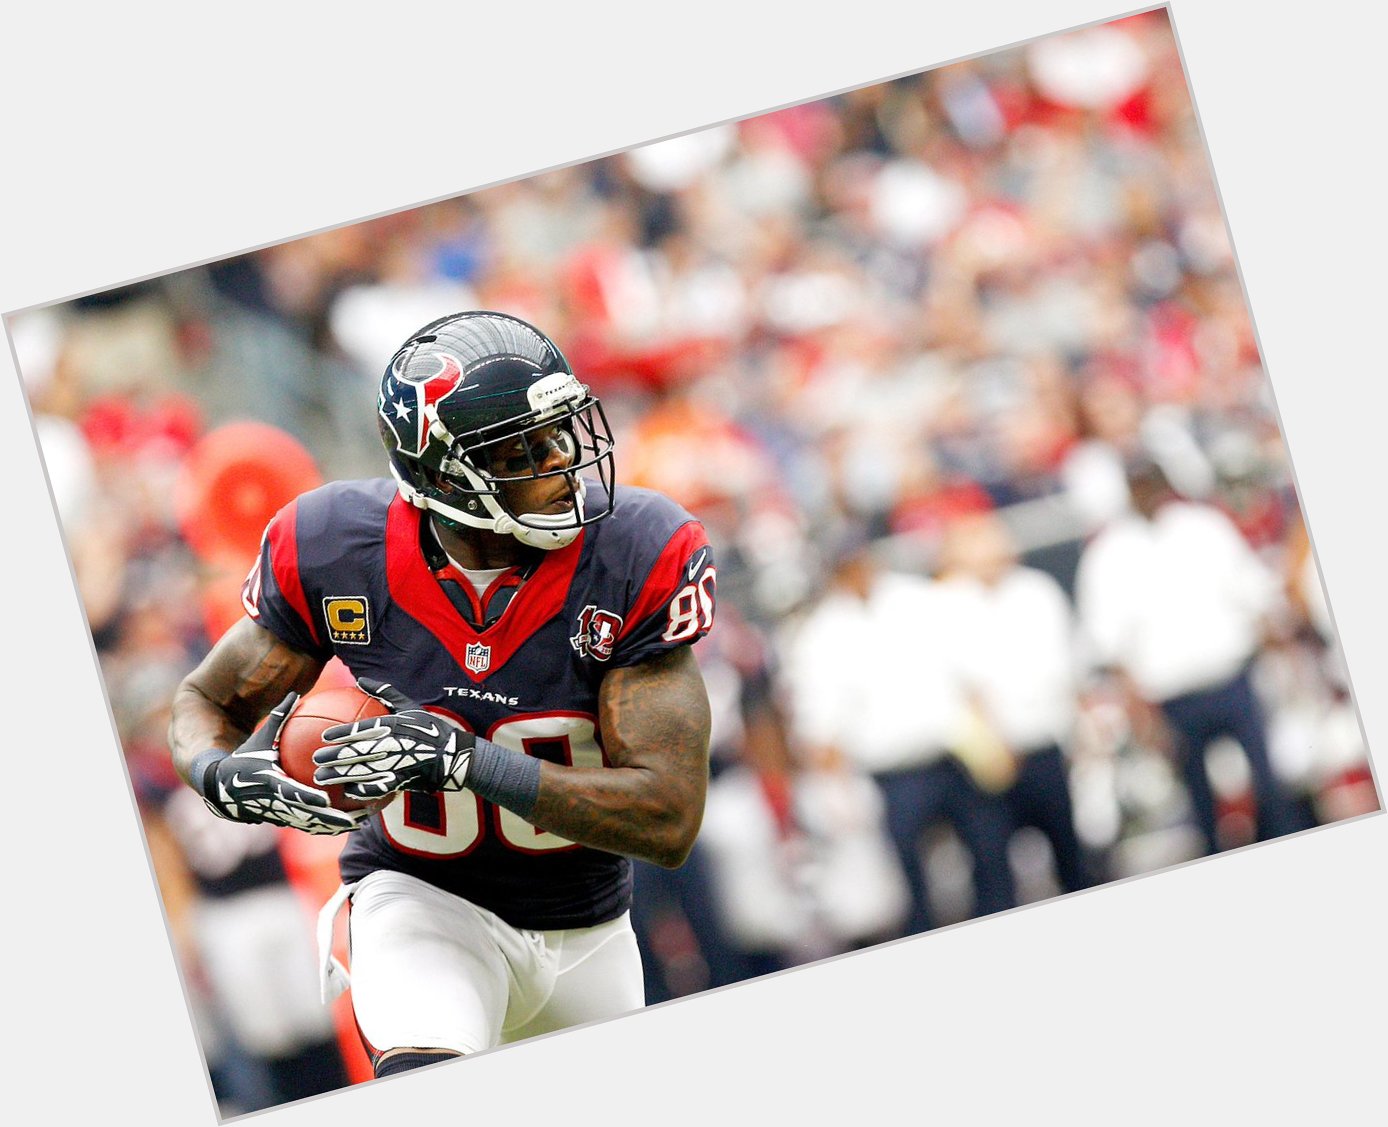 Happy Birthday to Andre Johnson who turns 36 today! 